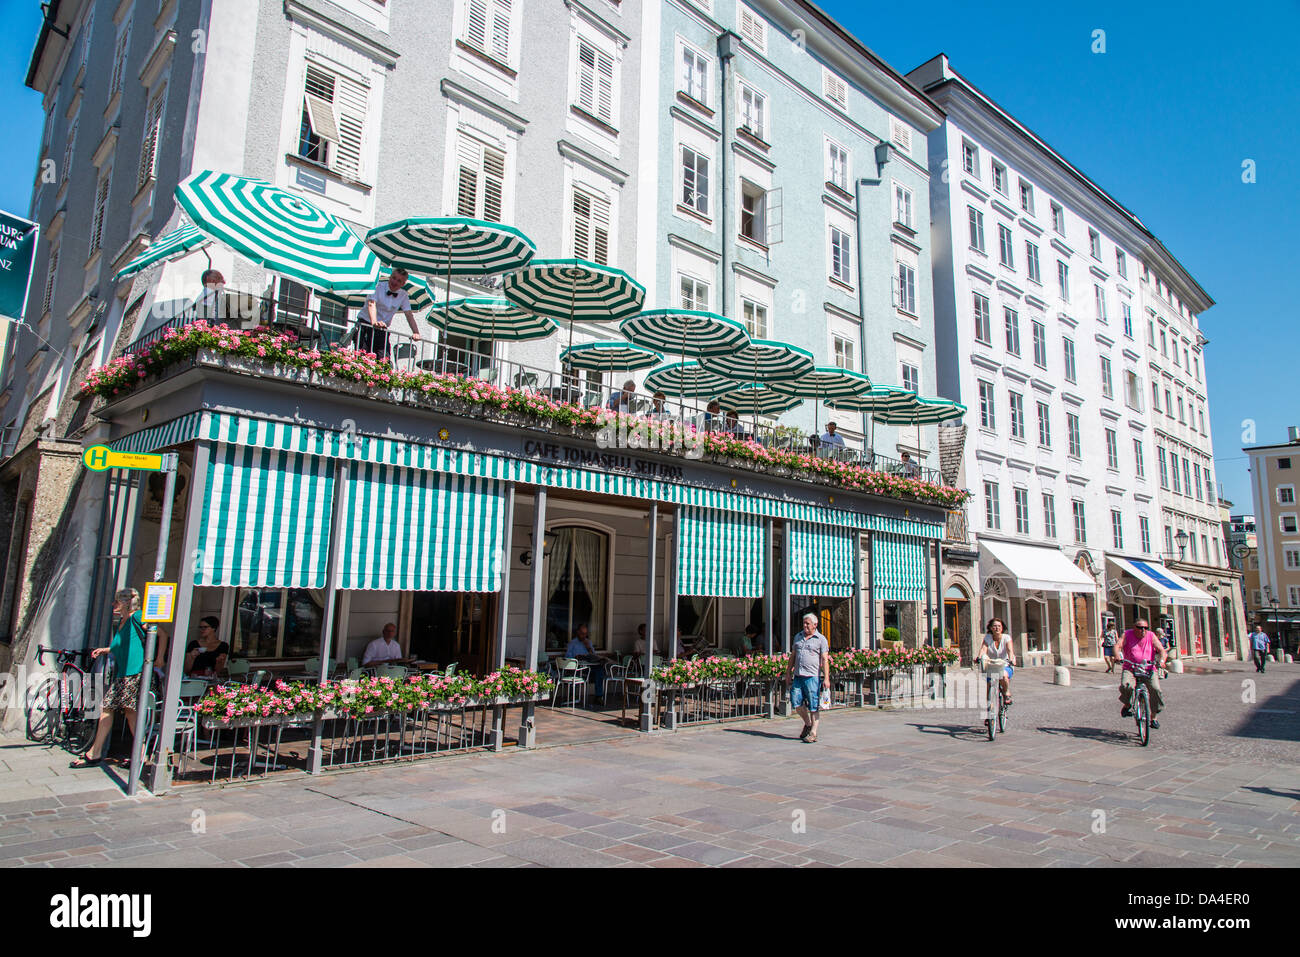 The famous Cafe Tomaselli dated 18th century in Alter Markt square, Salzburg, Austria Stock Photo